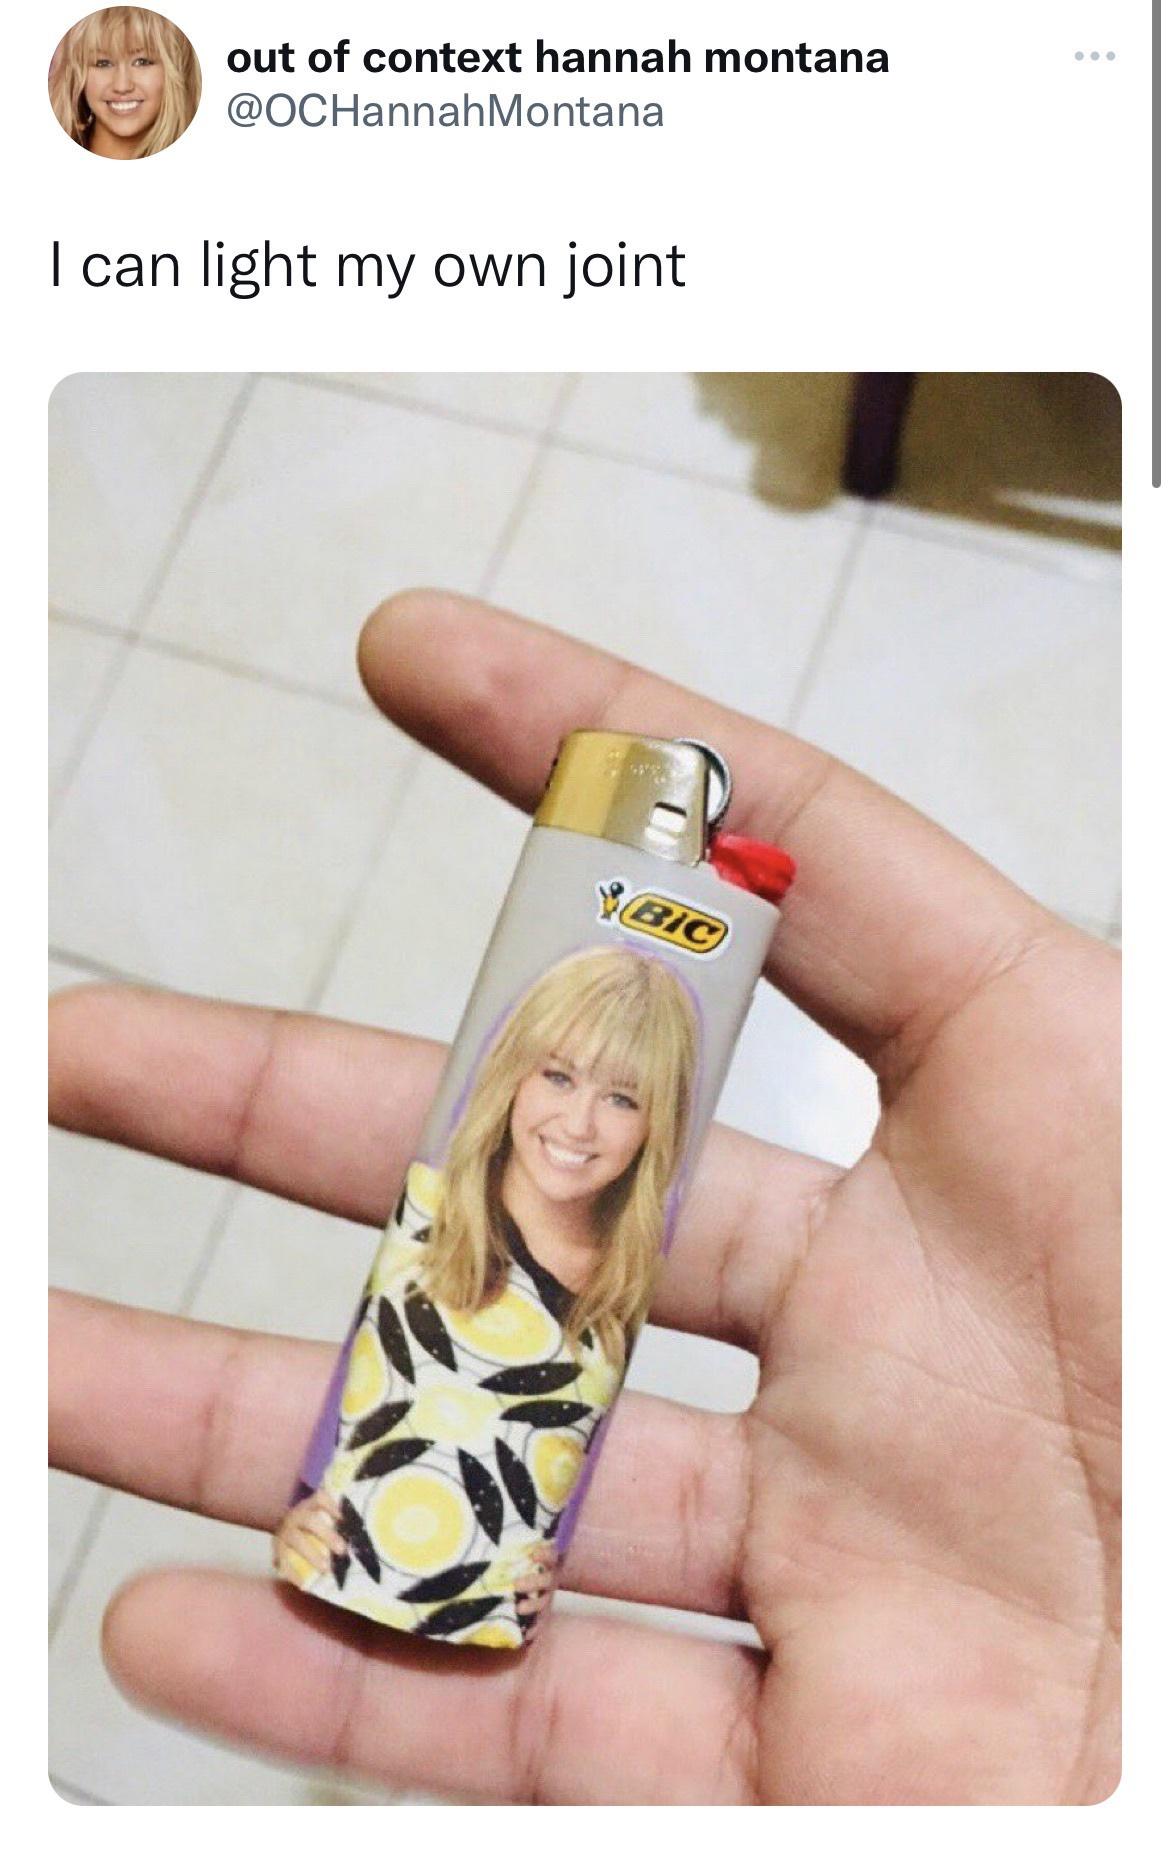 dank memes - nail - out of context hannah montana I can light my own joint Bic